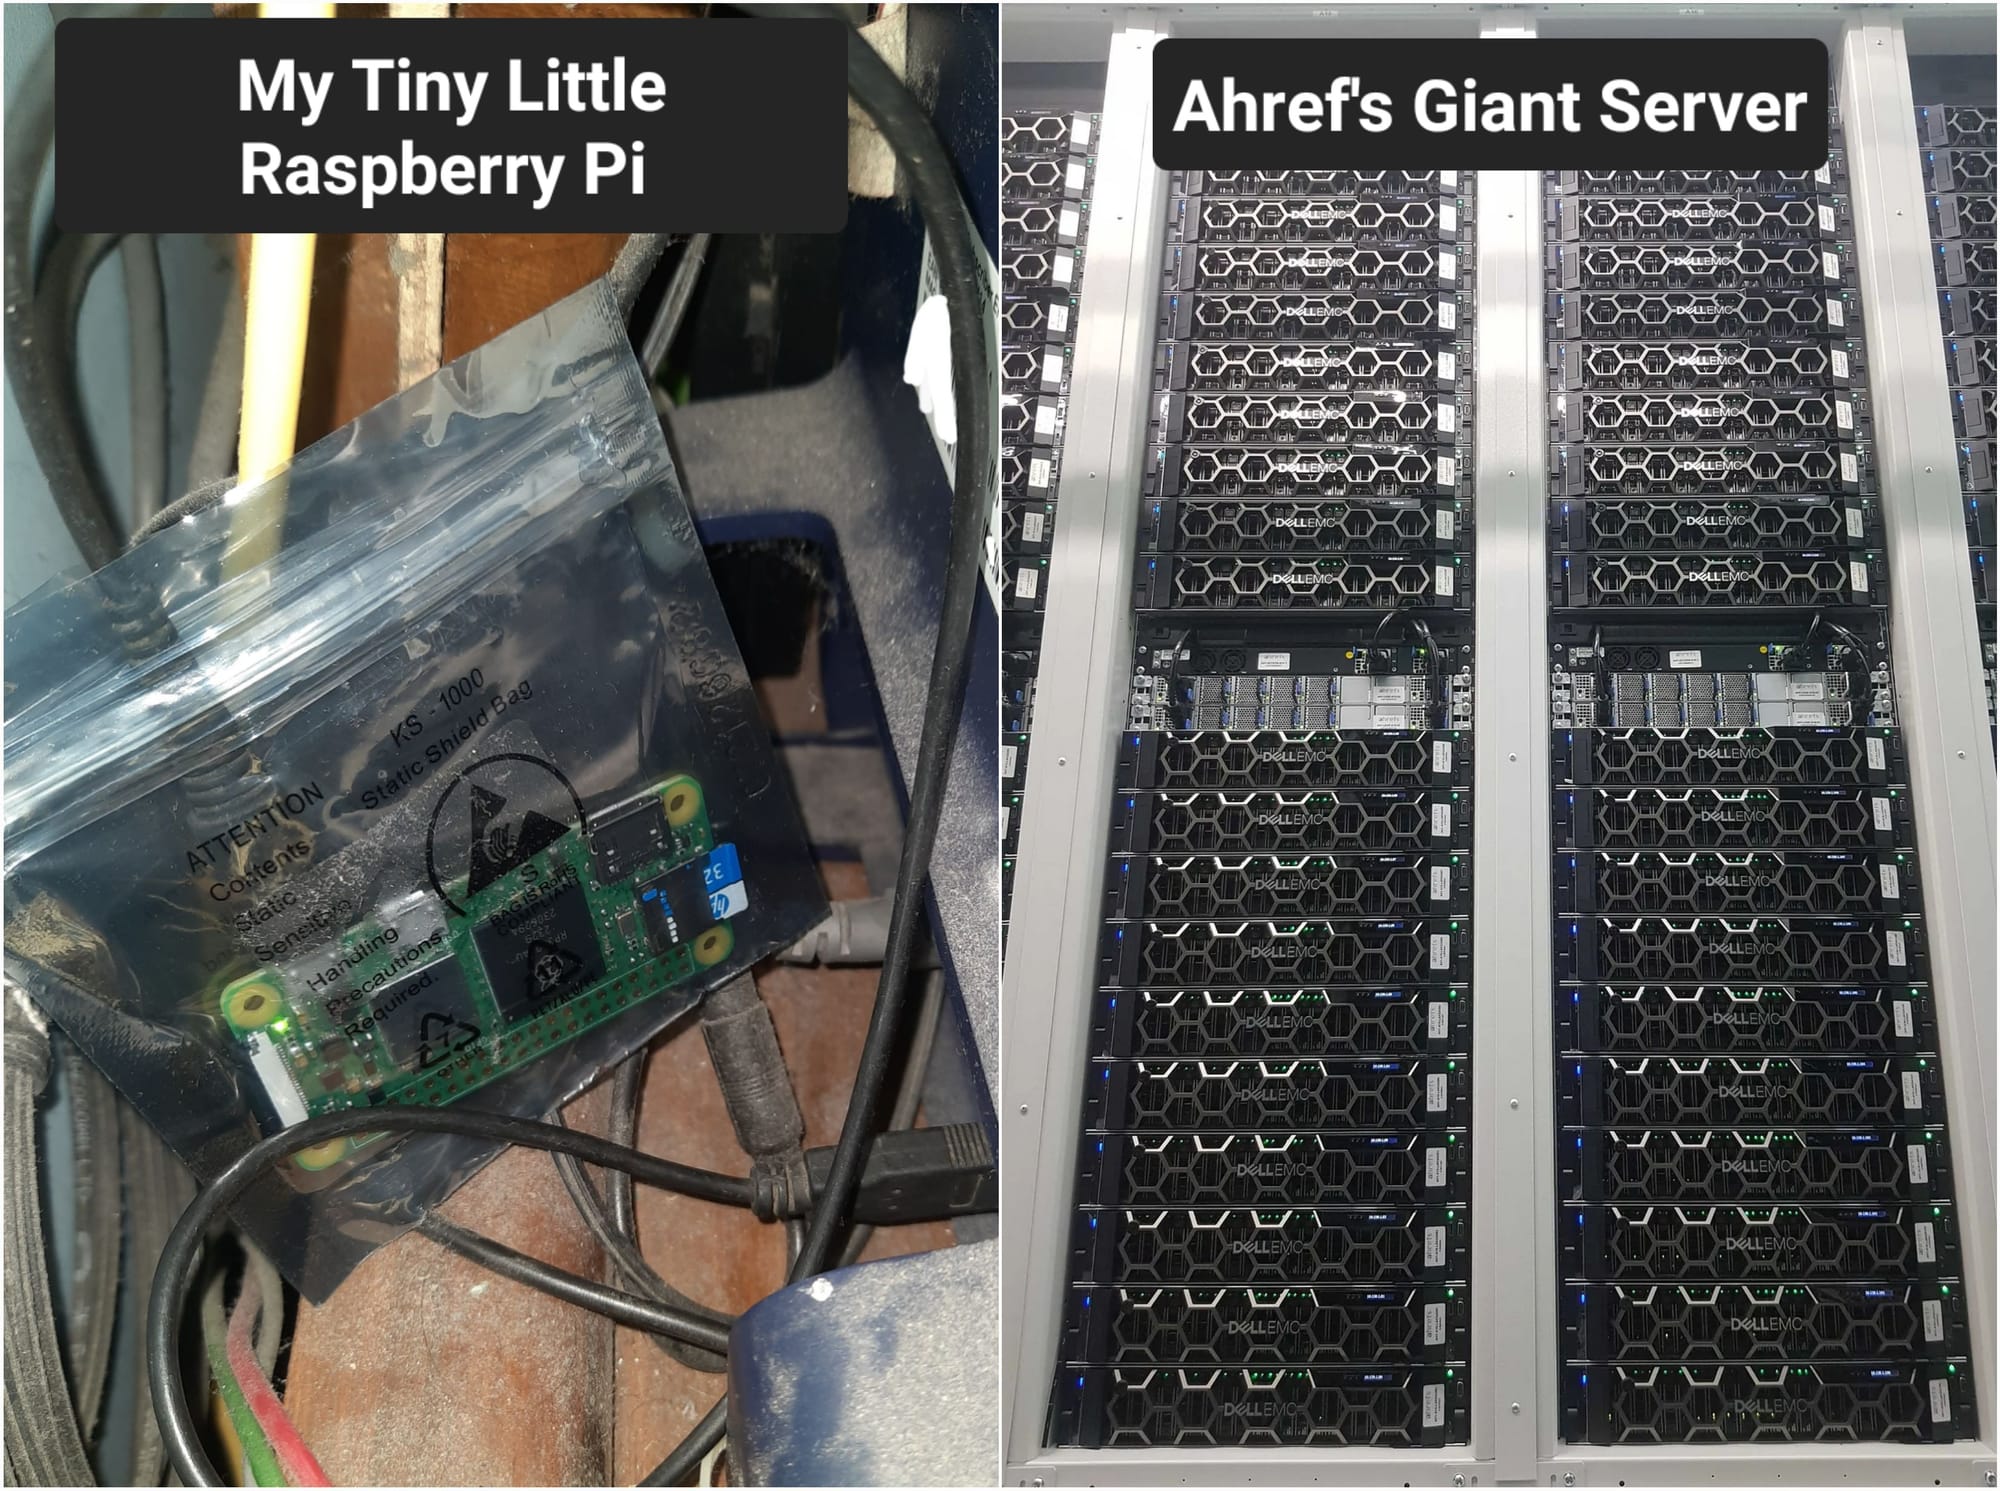 My tiny little Raspberry Pi vs Ahrefs Server (both are servers, but the scale and job is different)